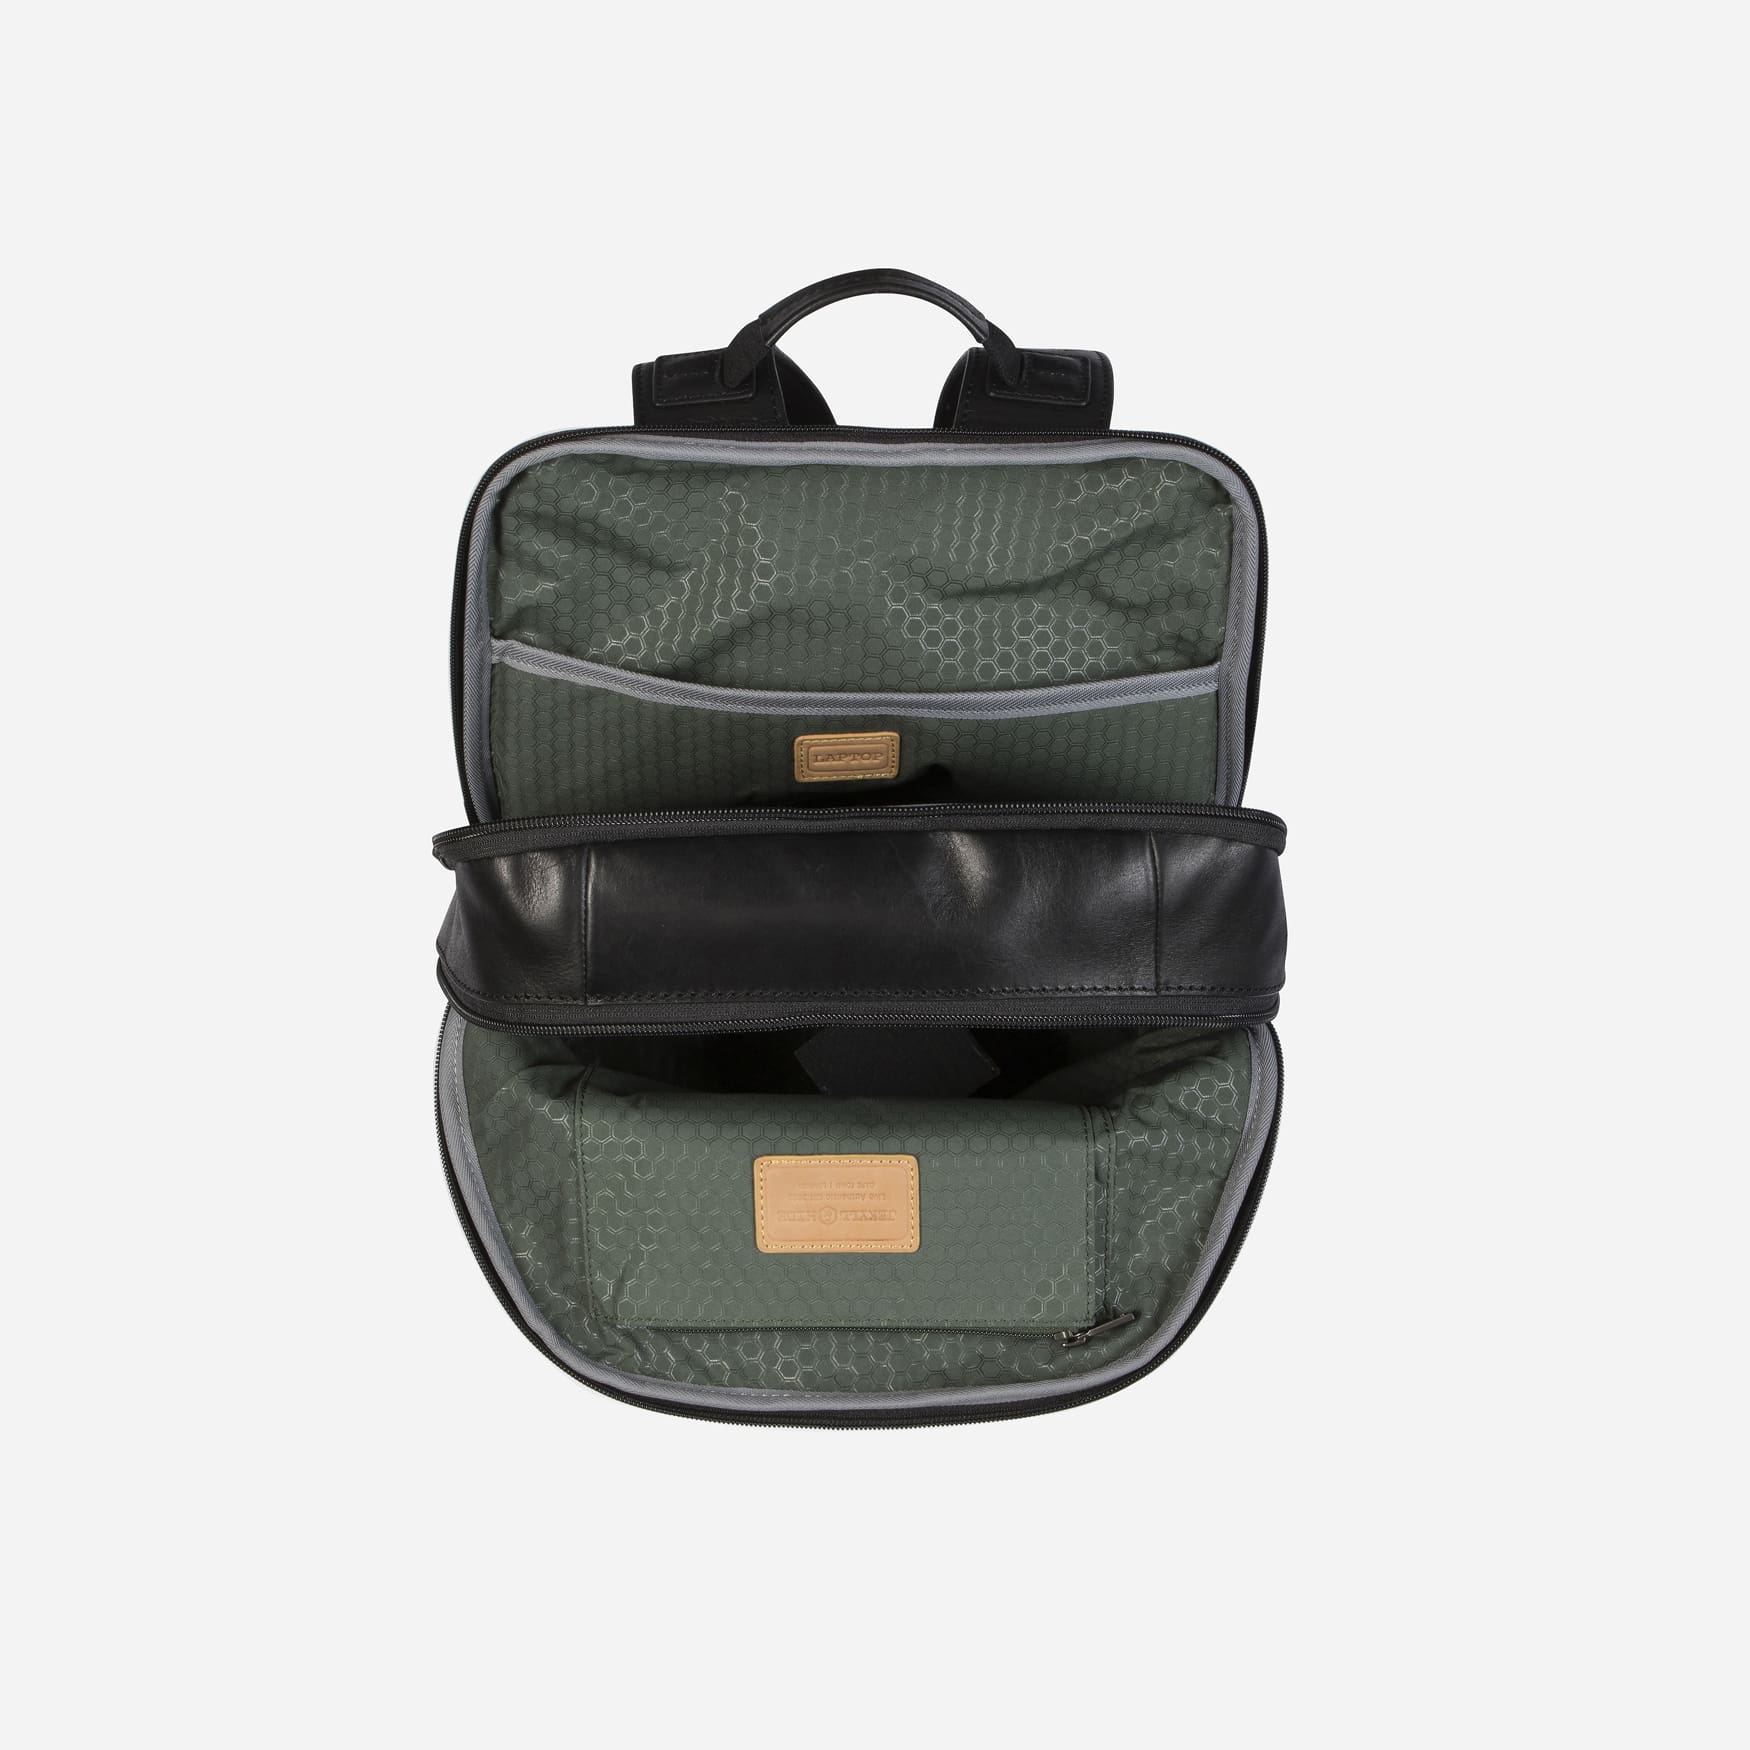 Single Compartment Backpack 45cm, Black